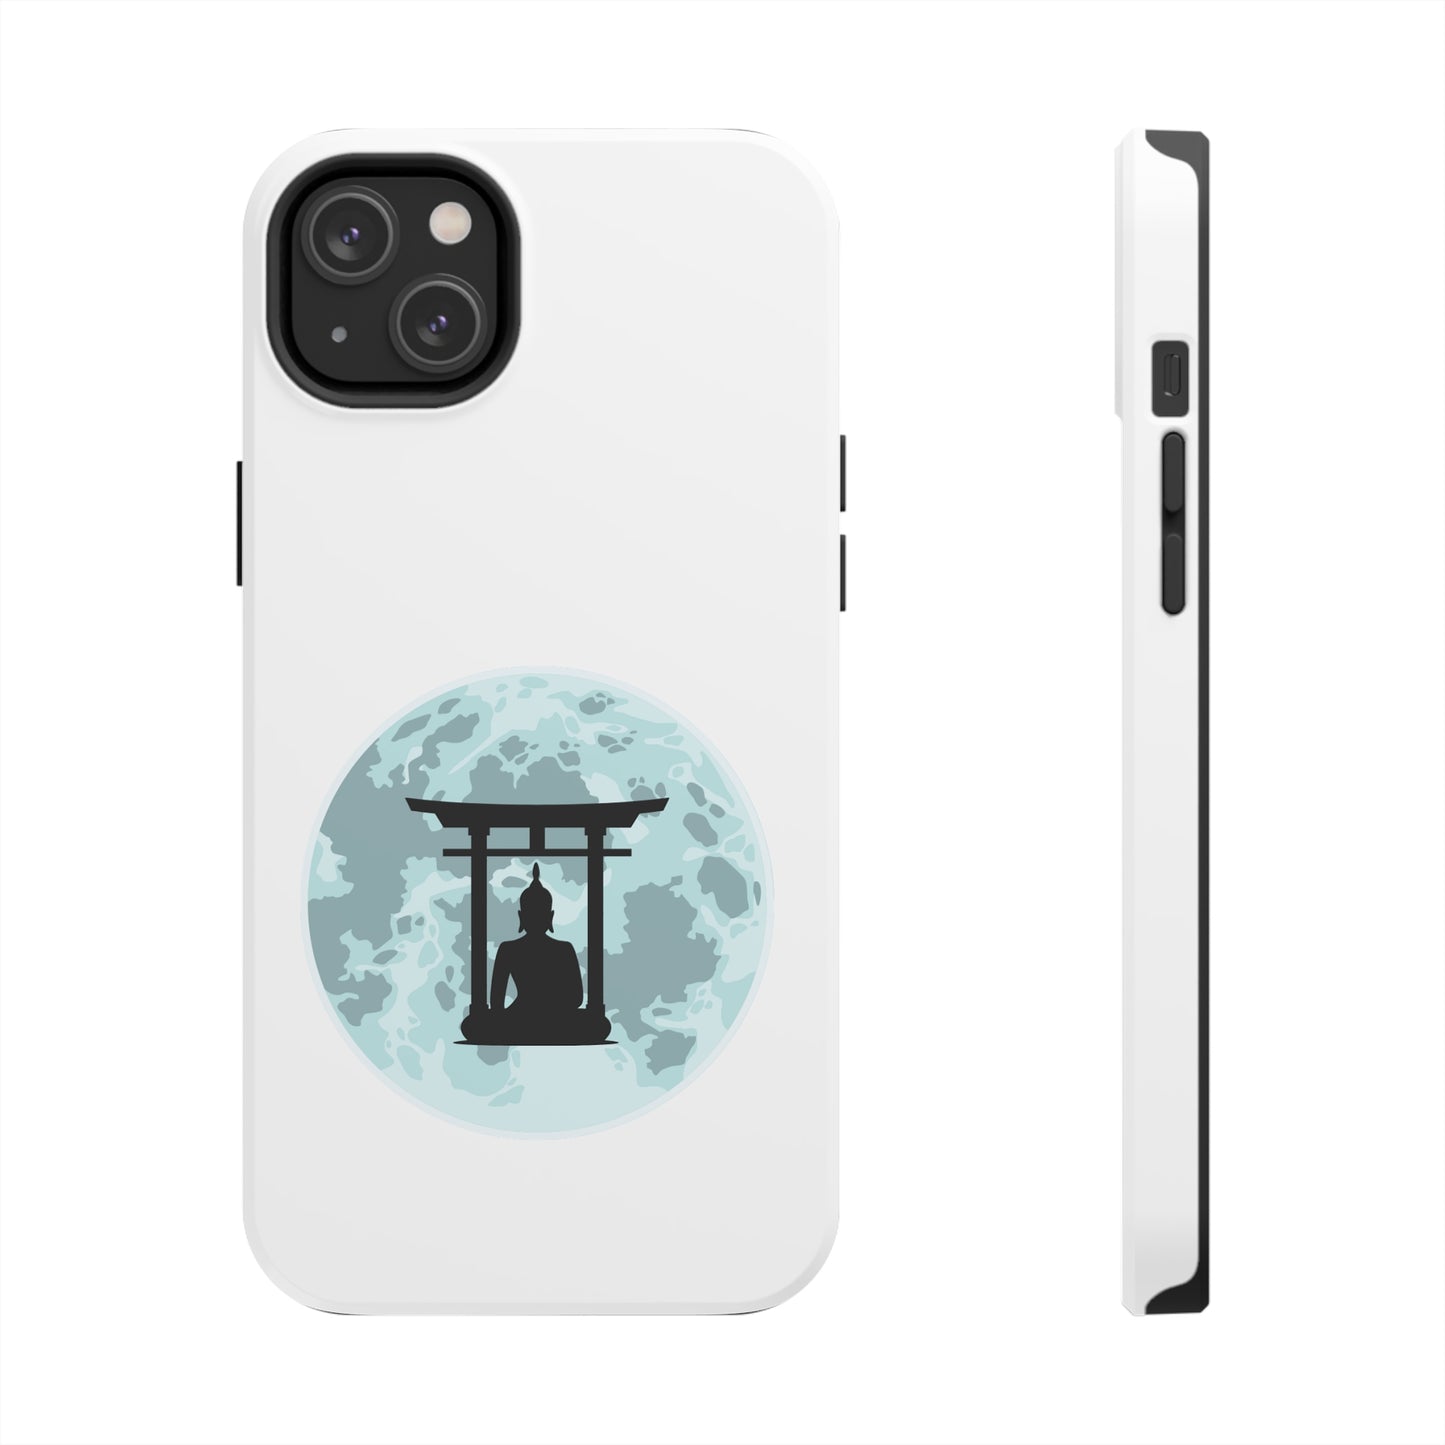 Celebrating Full Moon day of Waso with a tough phone case